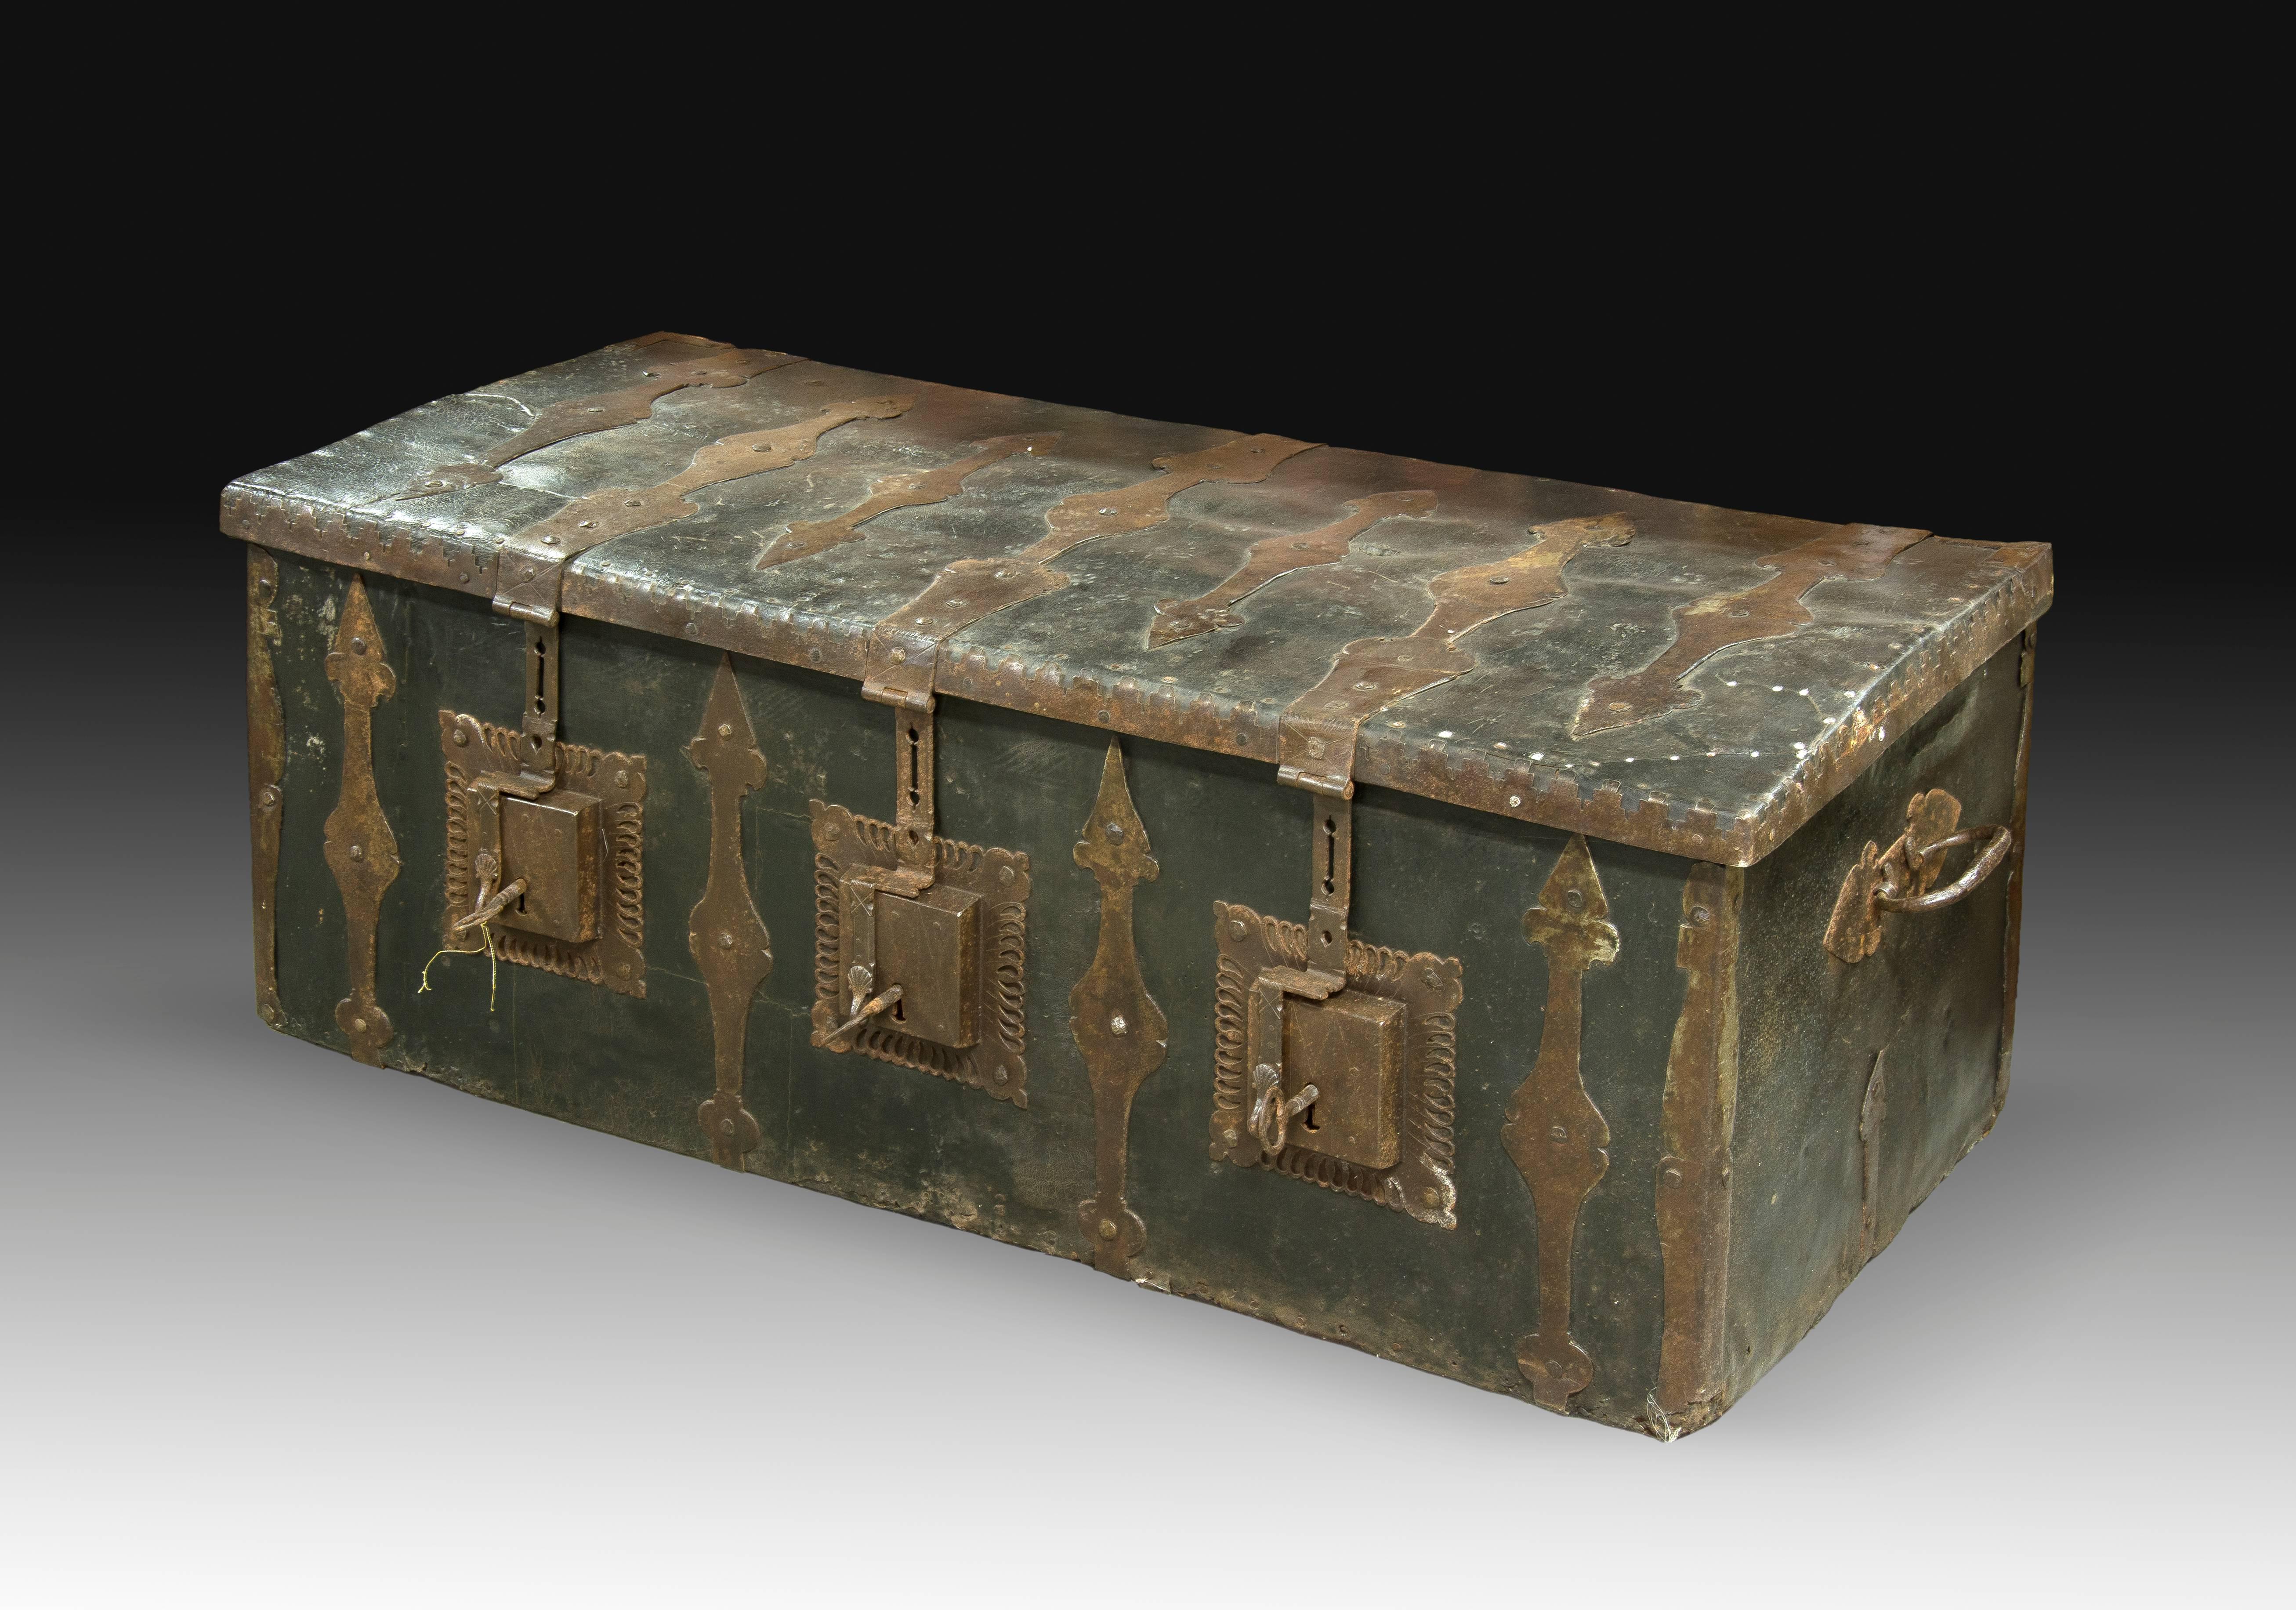 Trunk with three locks, made in wood, leather and wrought iron. This type of trunks and chest with three locks were very common in town halls. The decoration links the piece with the Baroque art.
Size: 125x48x57 cms.
International Buyers – Please